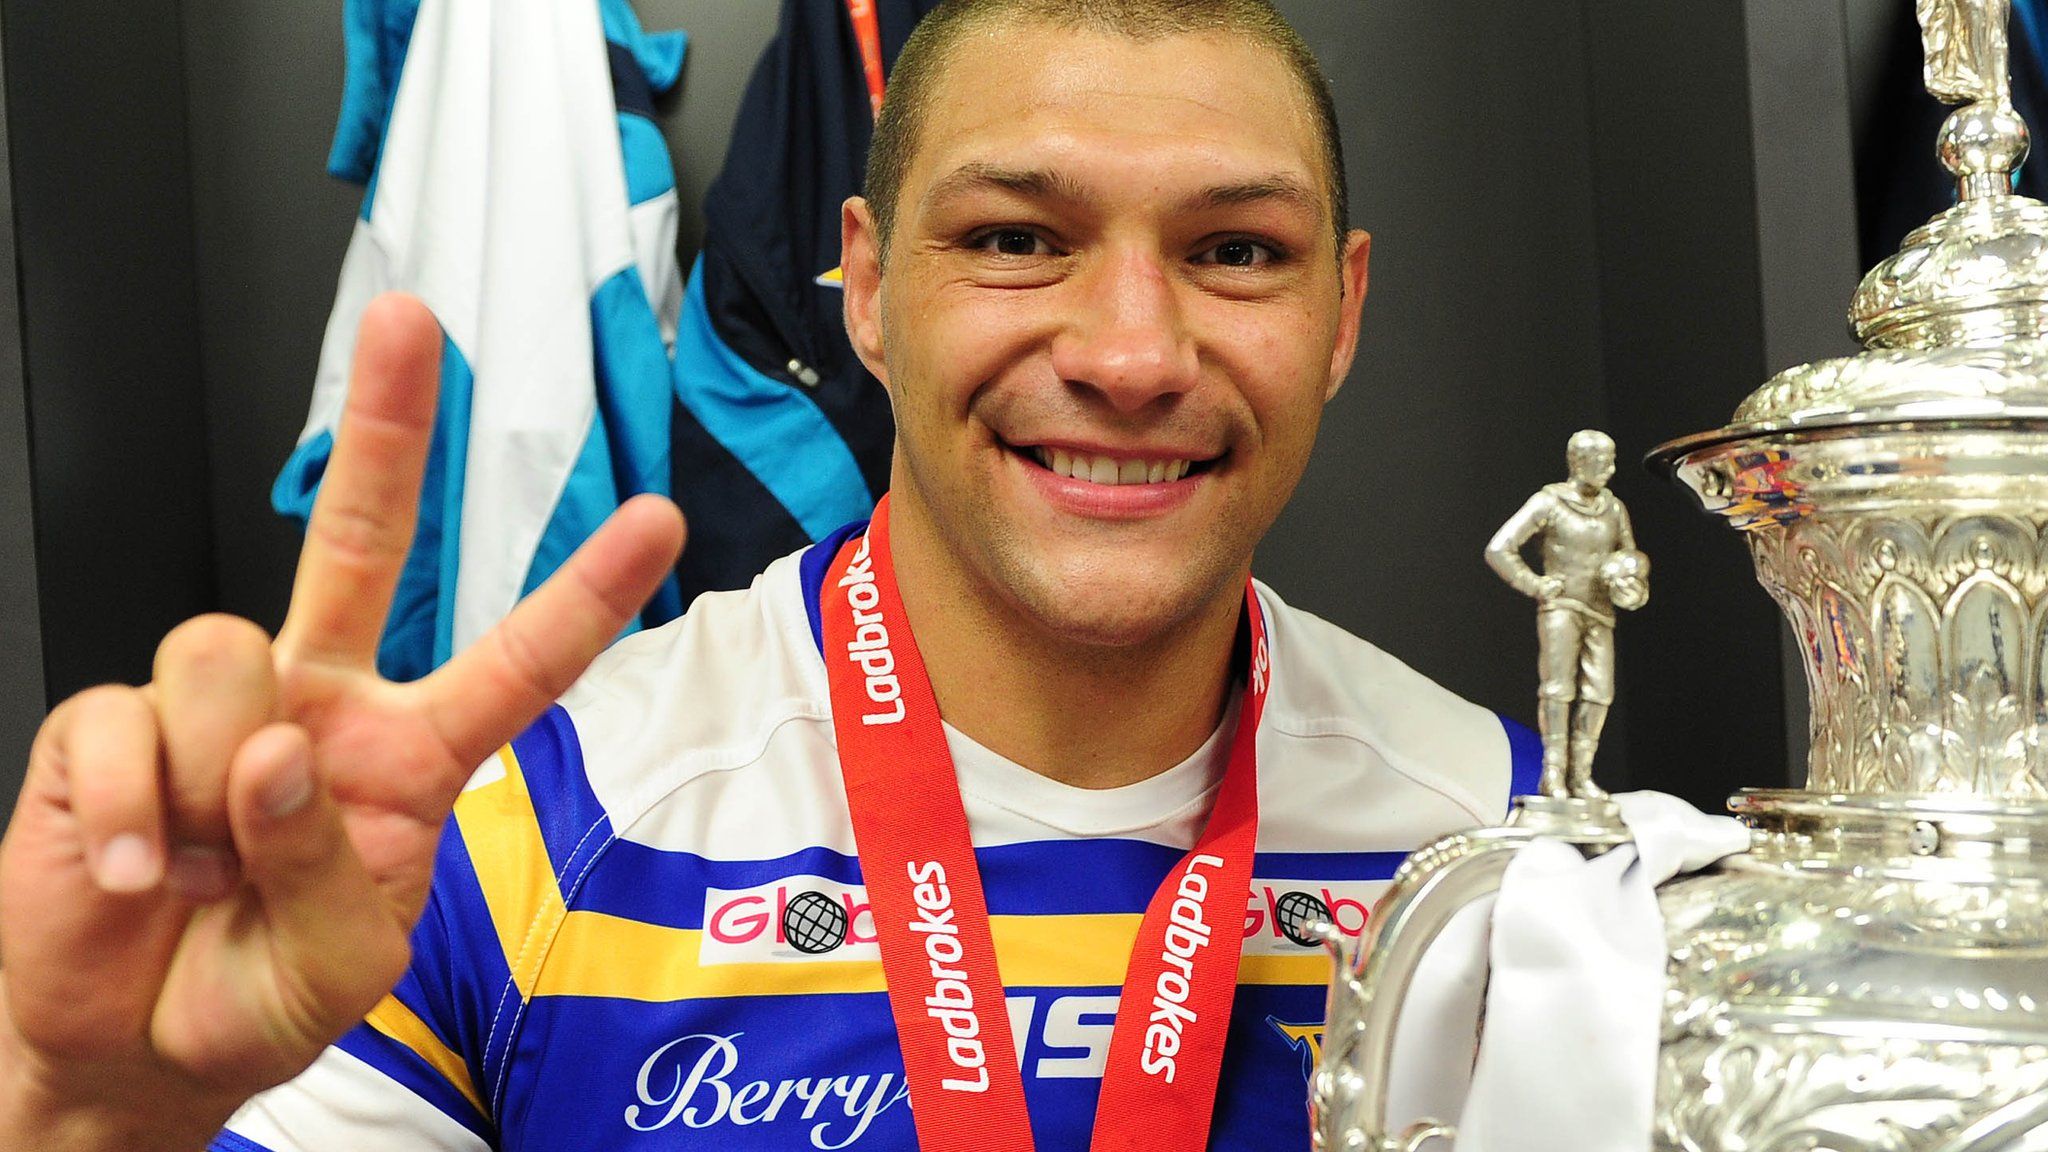 Ryan Hall poses with the Challenge Cup